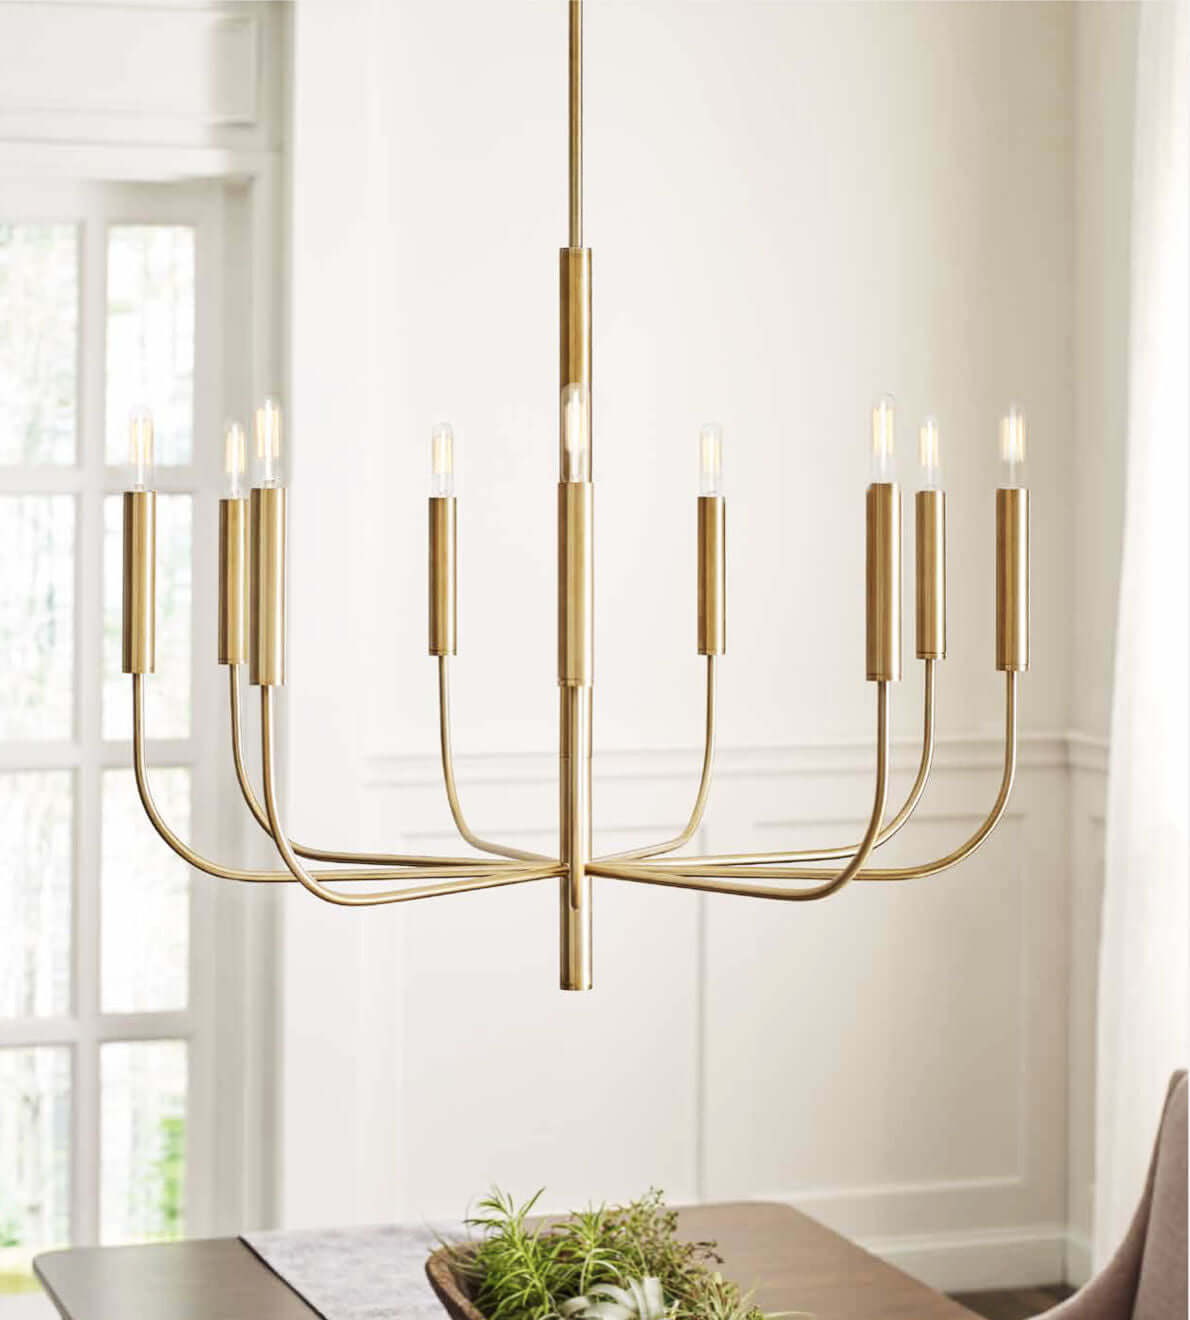 Statement Ceiling Pendant Light in Dining Room